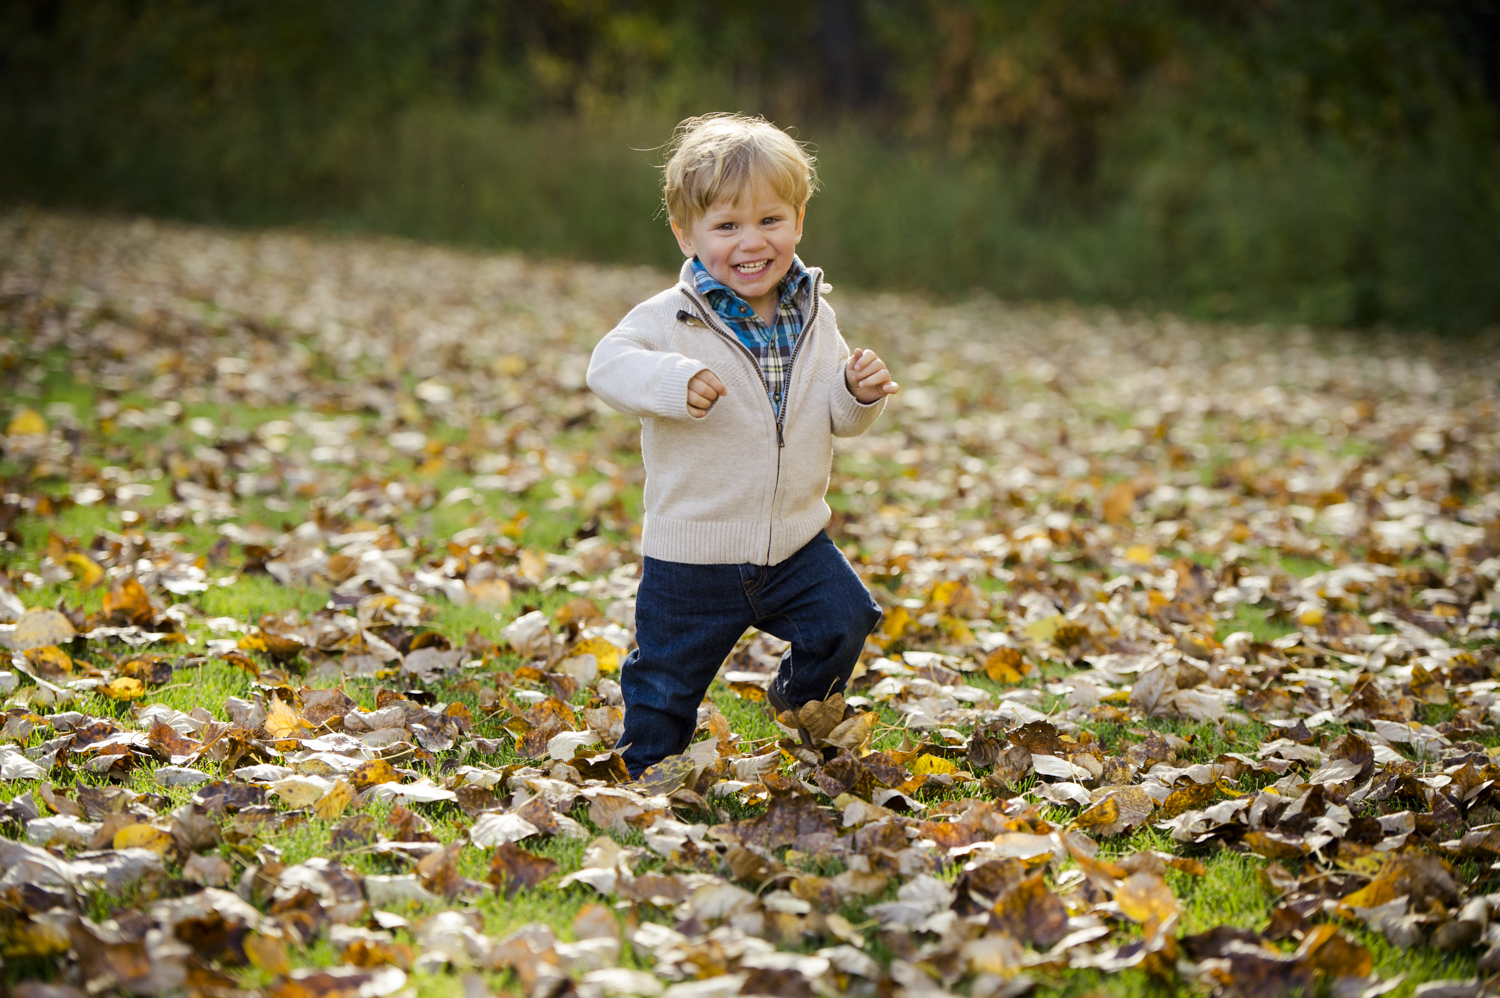 fall_lifestyle_family_leaves_candid_playing-002.jpg